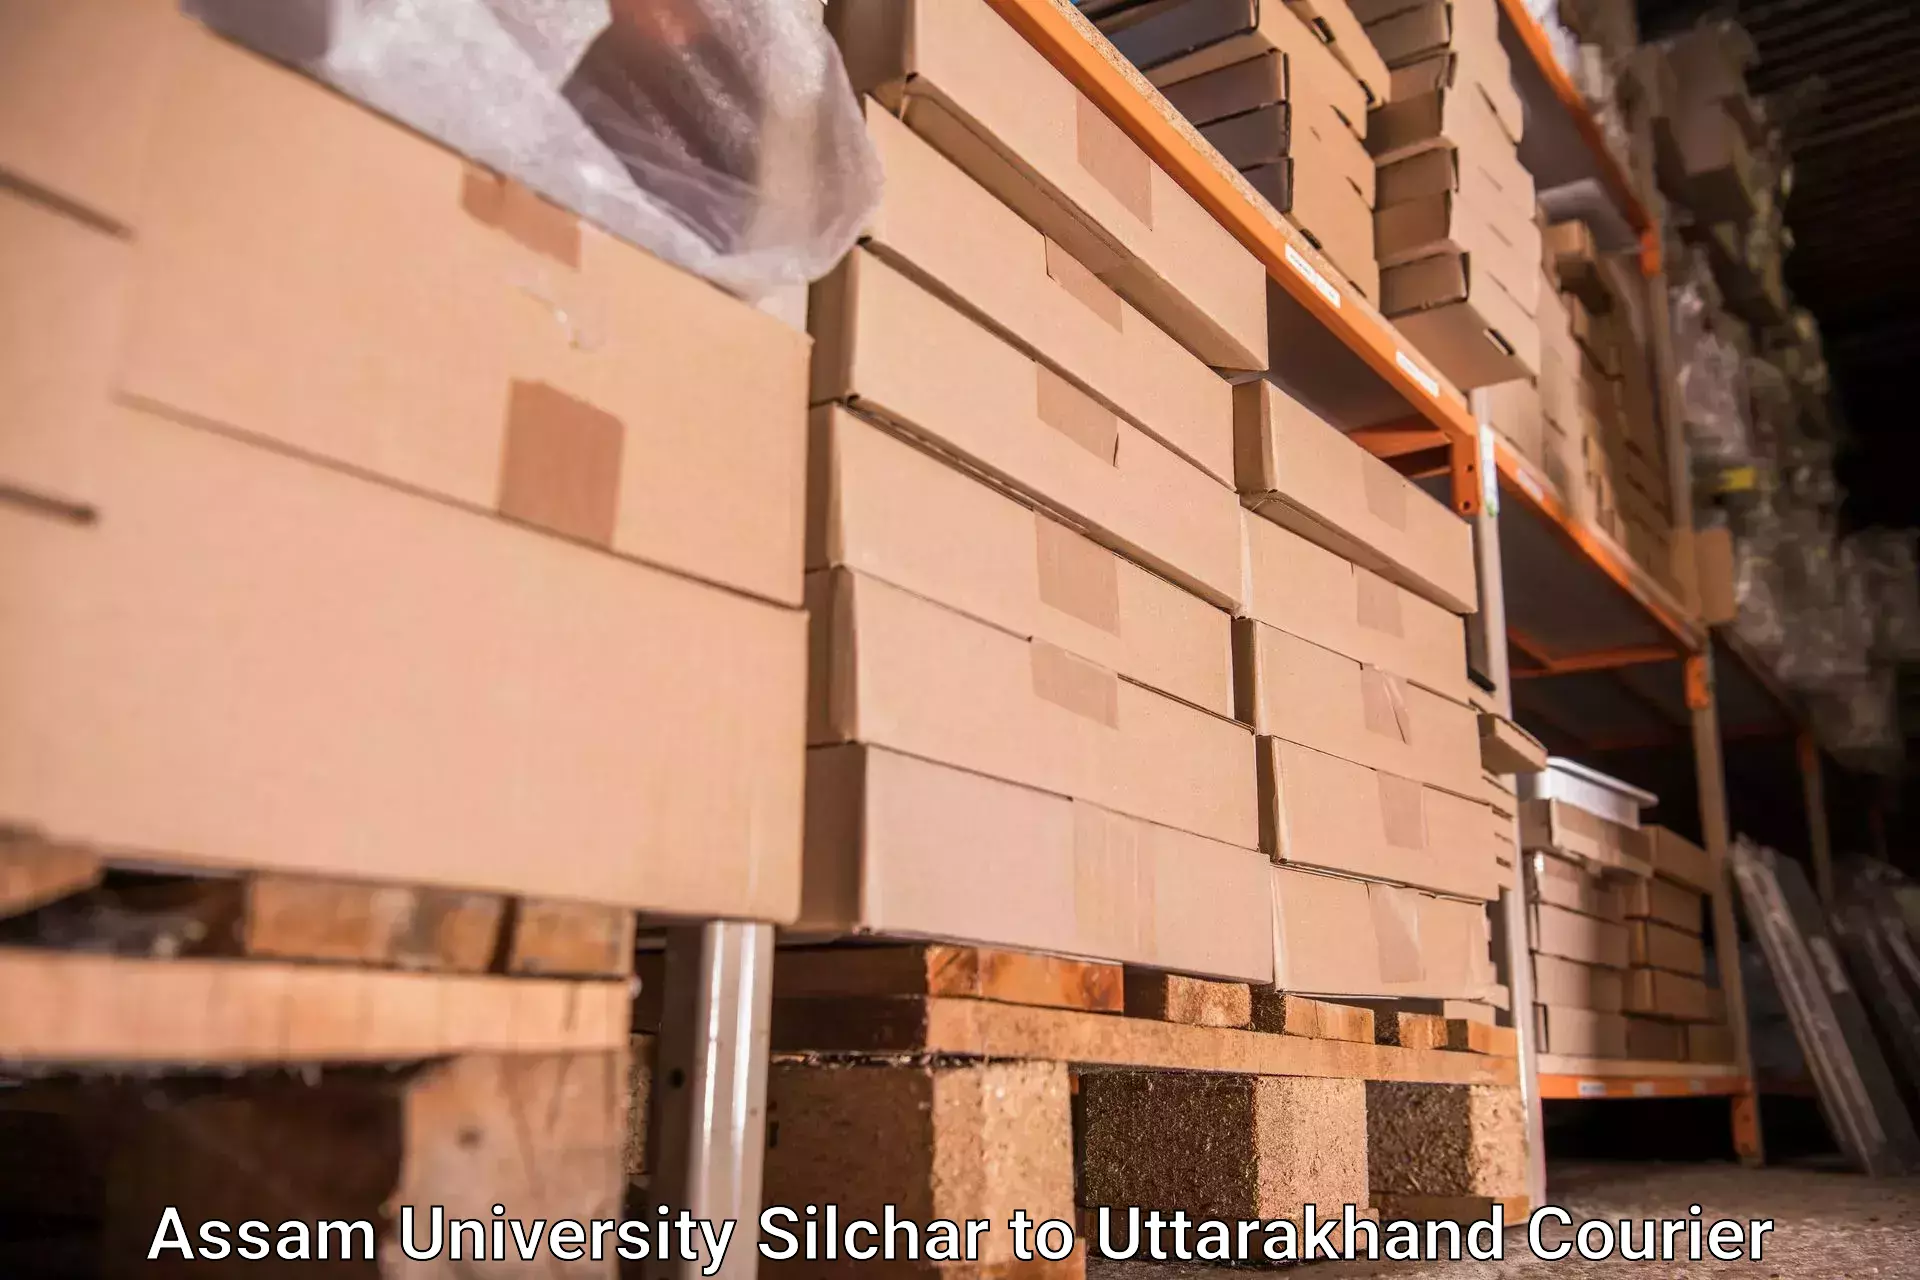 Baggage shipping advice Assam University Silchar to Champawat